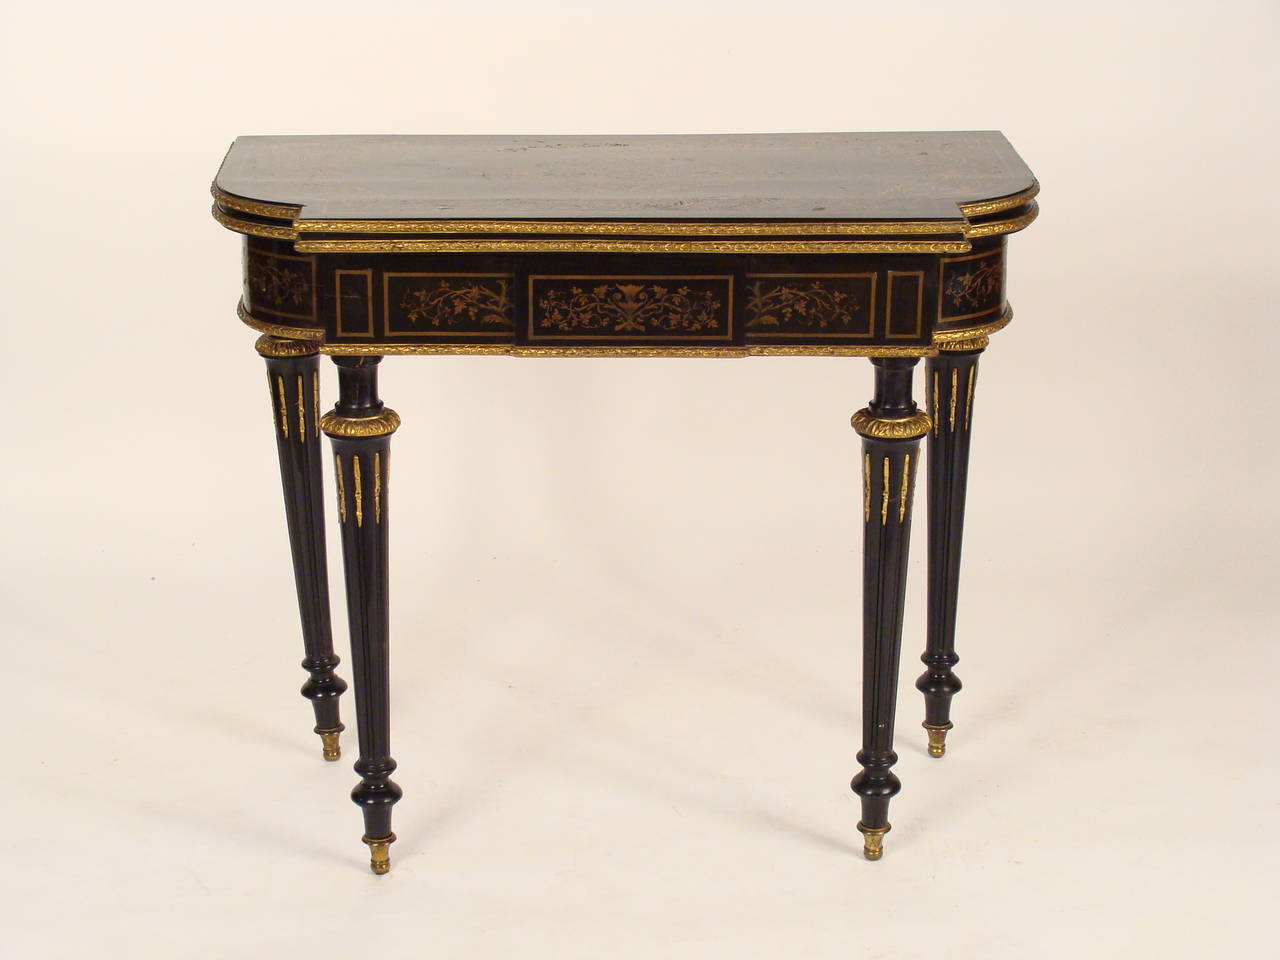 Napoleon III style black lacquer games table with brass inlay and bronze mounts, circa 1920. This games table has exquisite engraved brass inlay. There is a metal label stating the table was made by Alfred Wimpen. The gaming surface measures 34.25